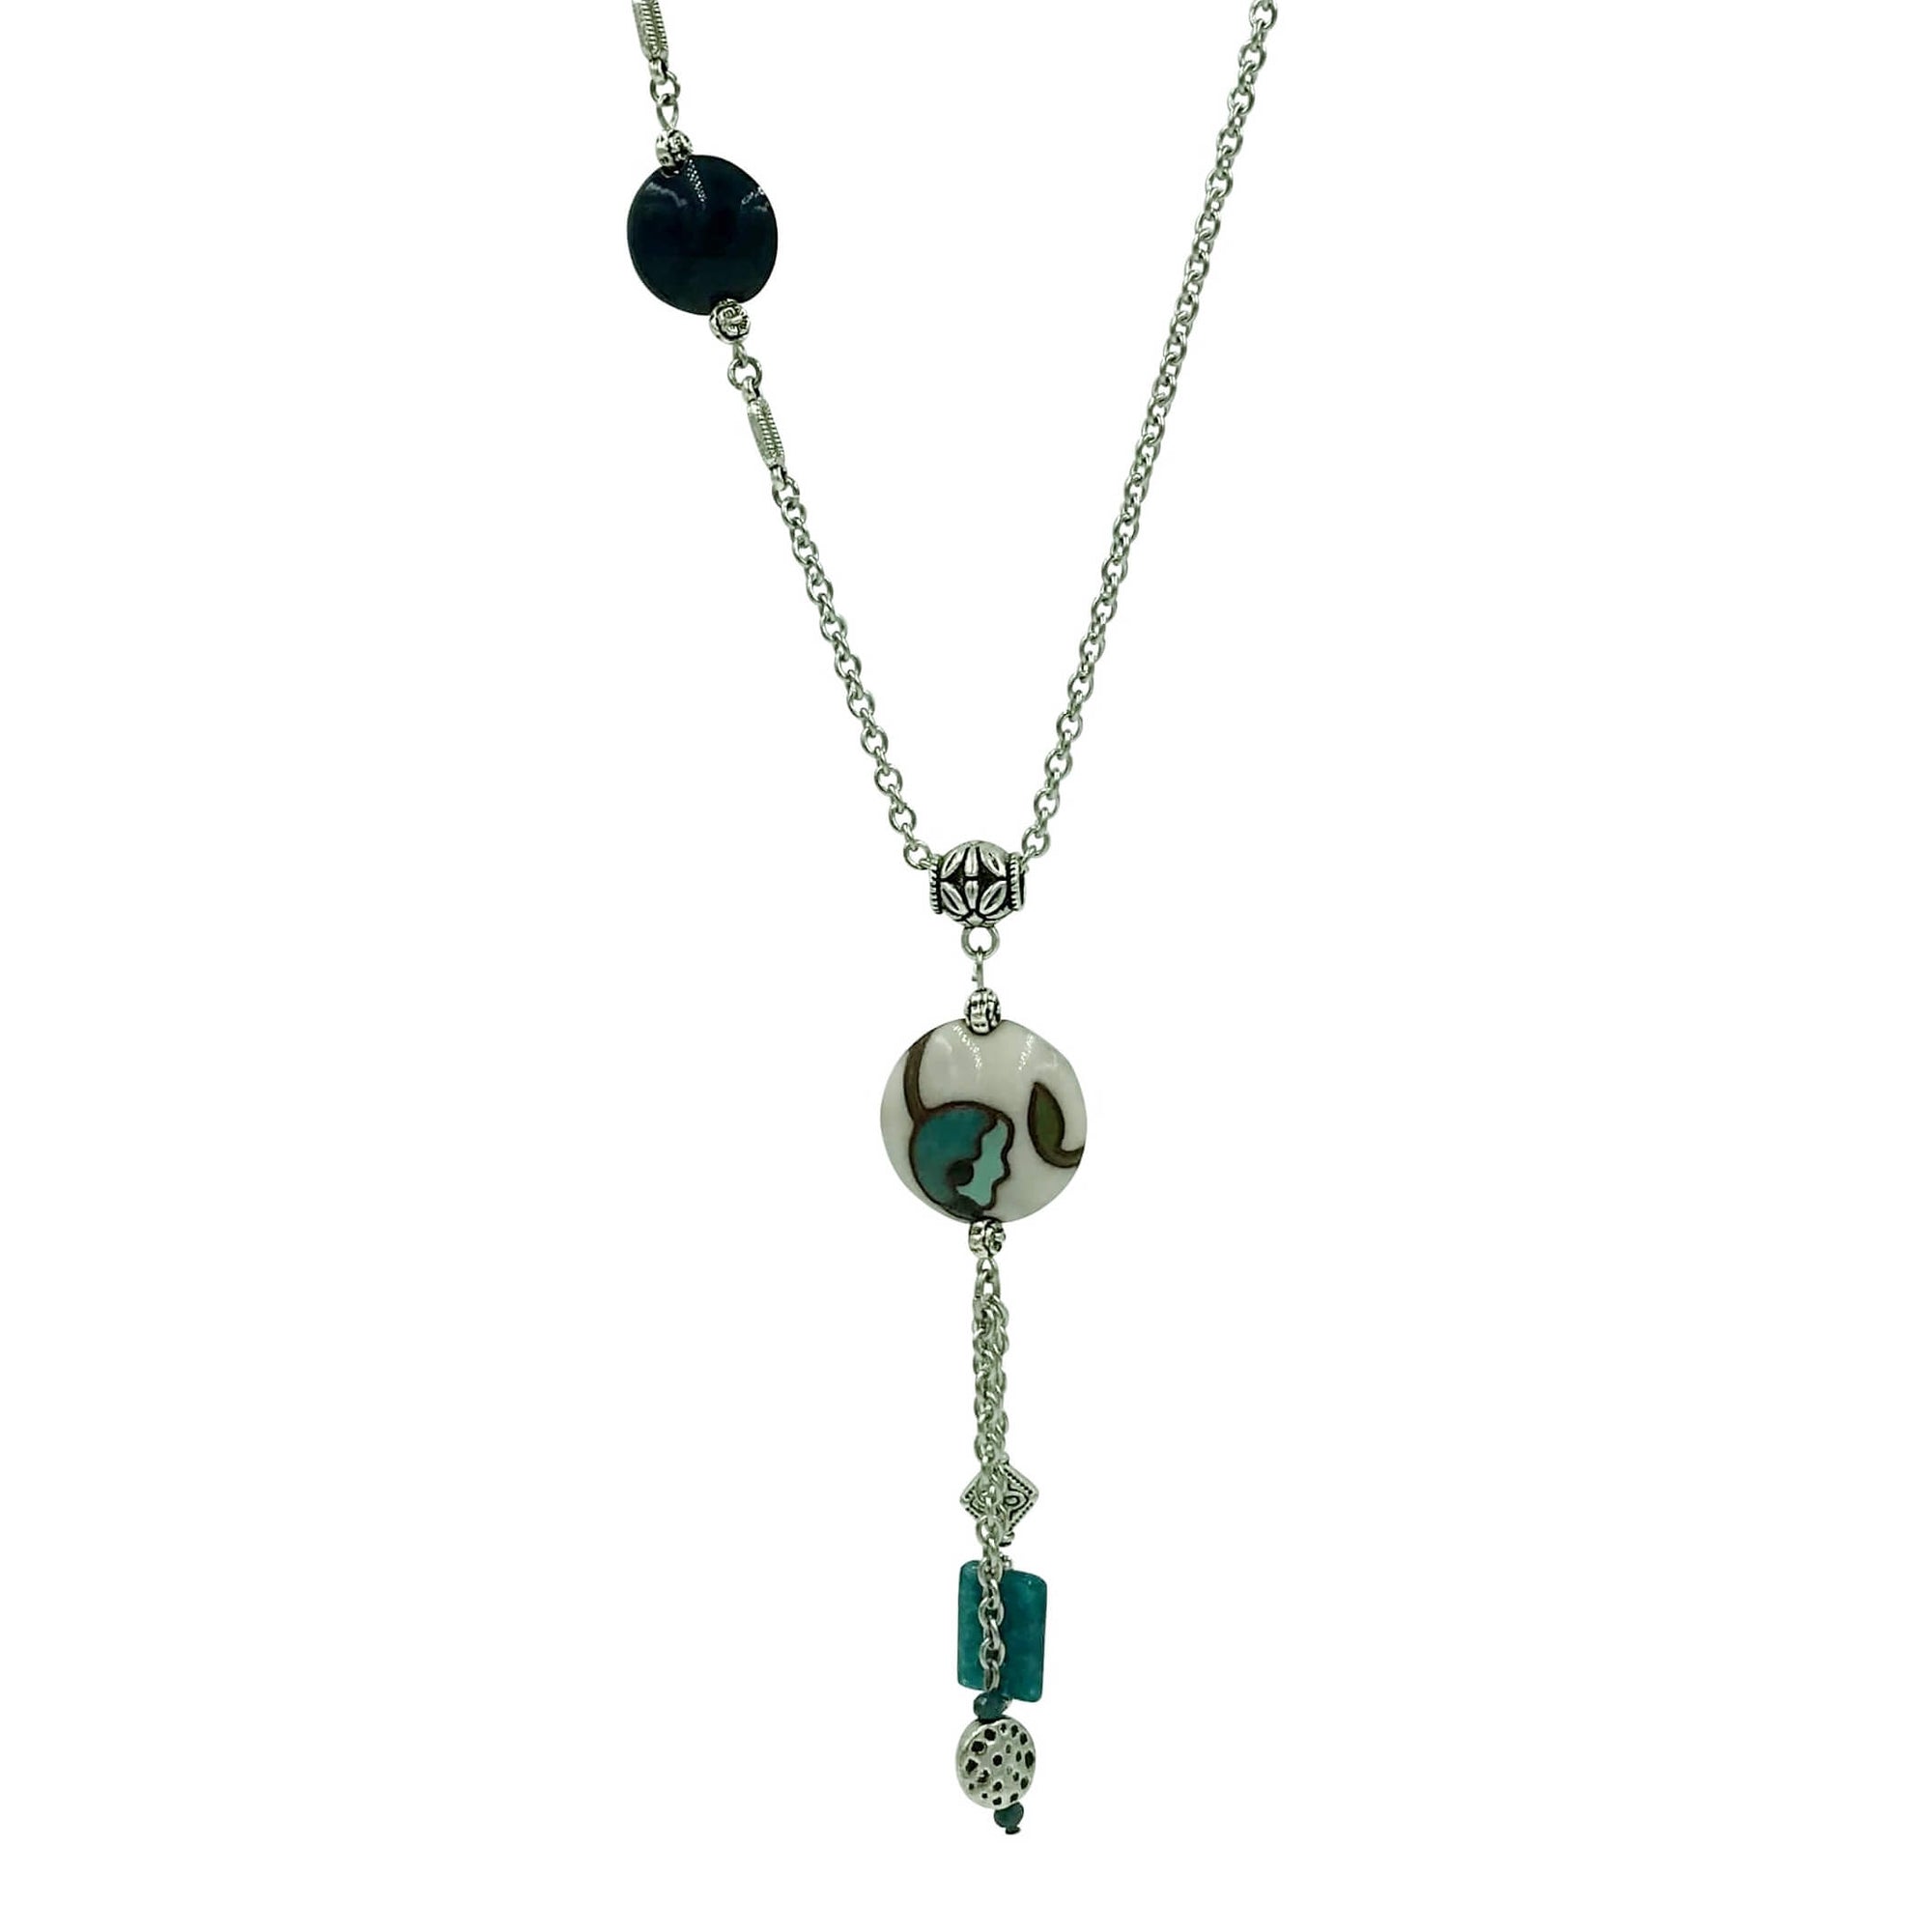 Teal Flower Golem Pendant Necklace with Apatite Stone and Golem Clay Beads-Necklaces- Creative Jewelry by Marcia